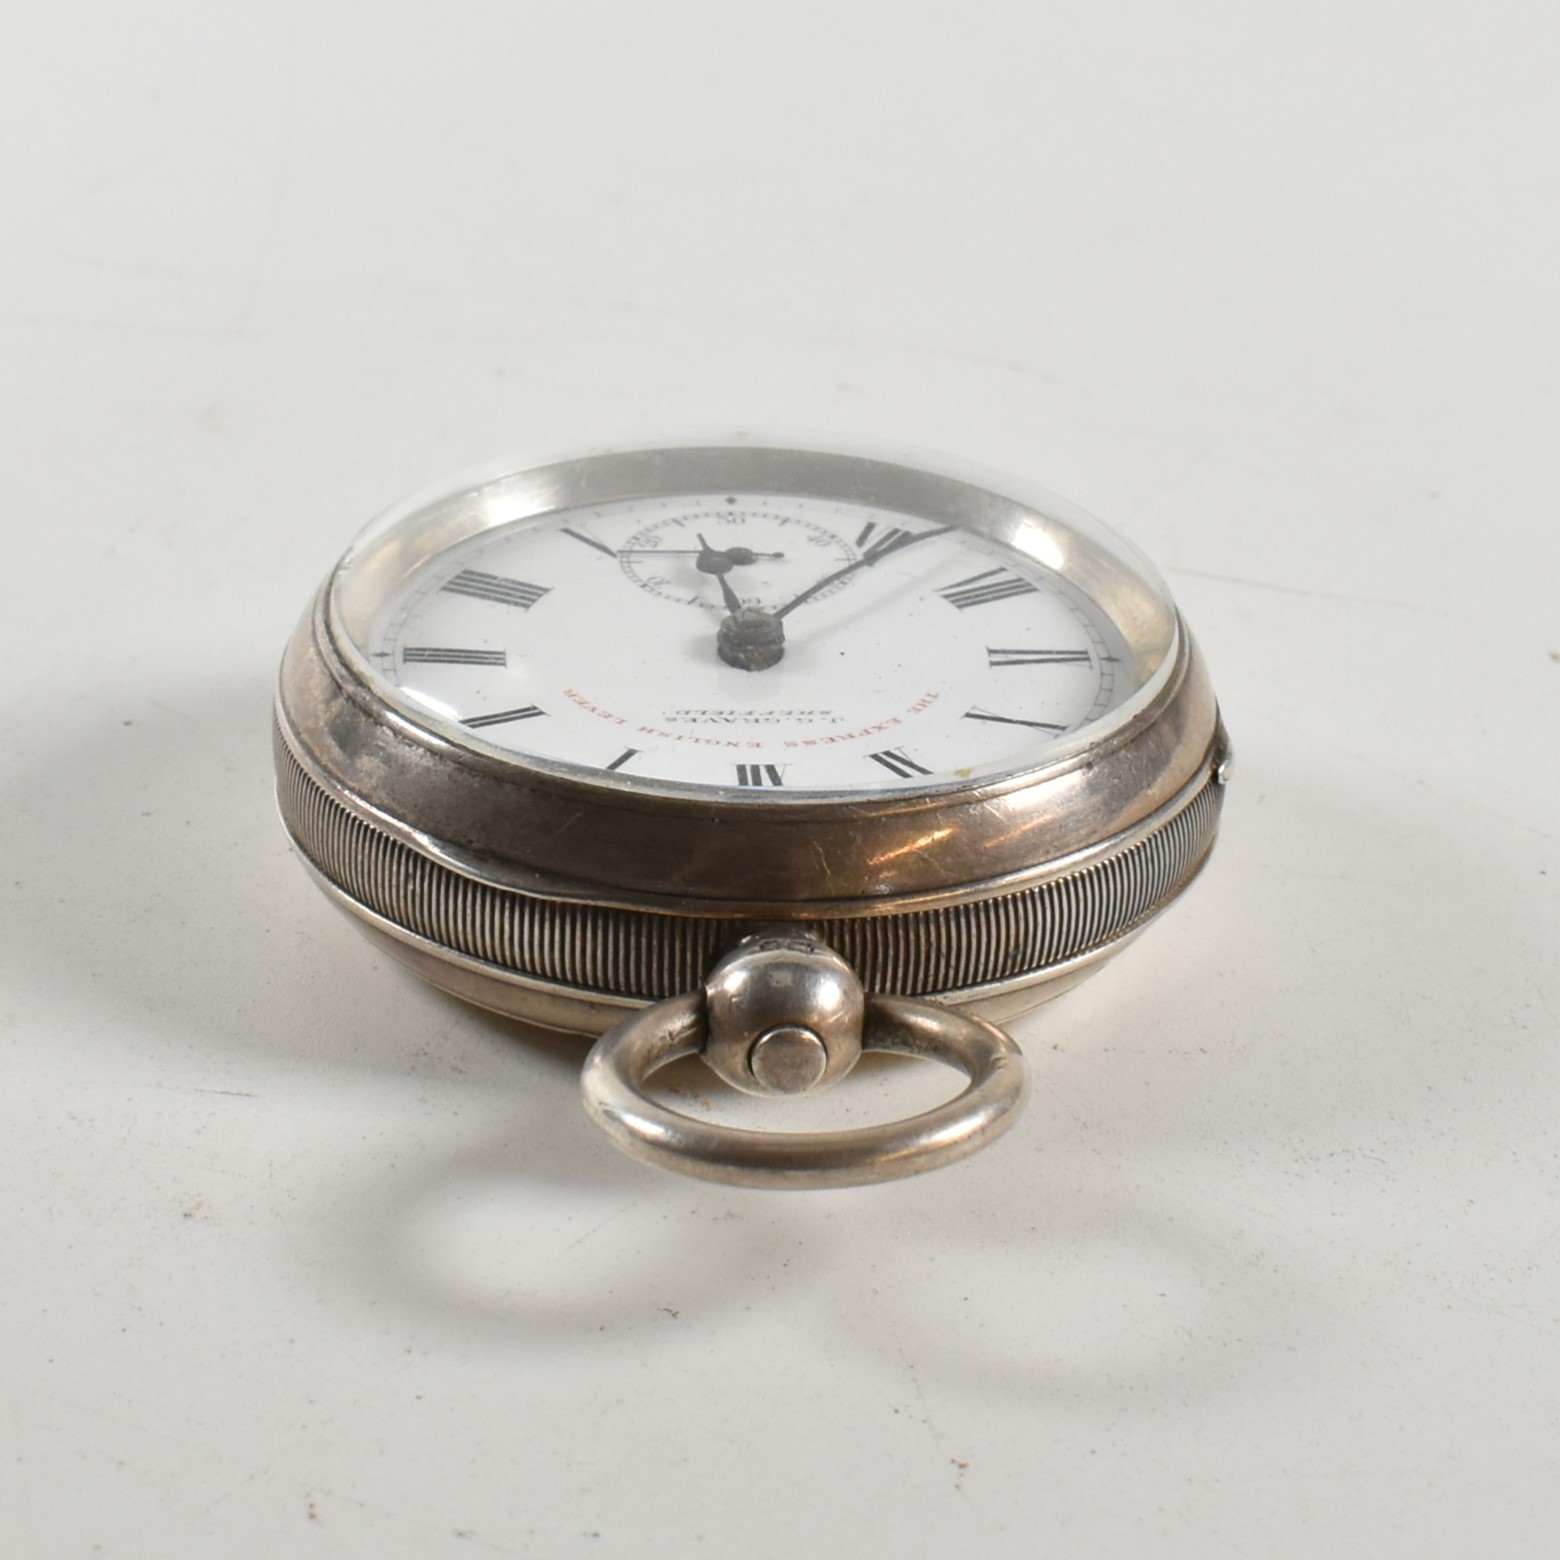 SILVER HALLMARKED JG GRAVES OPEN FACED POCKET WATCH - Image 7 of 8